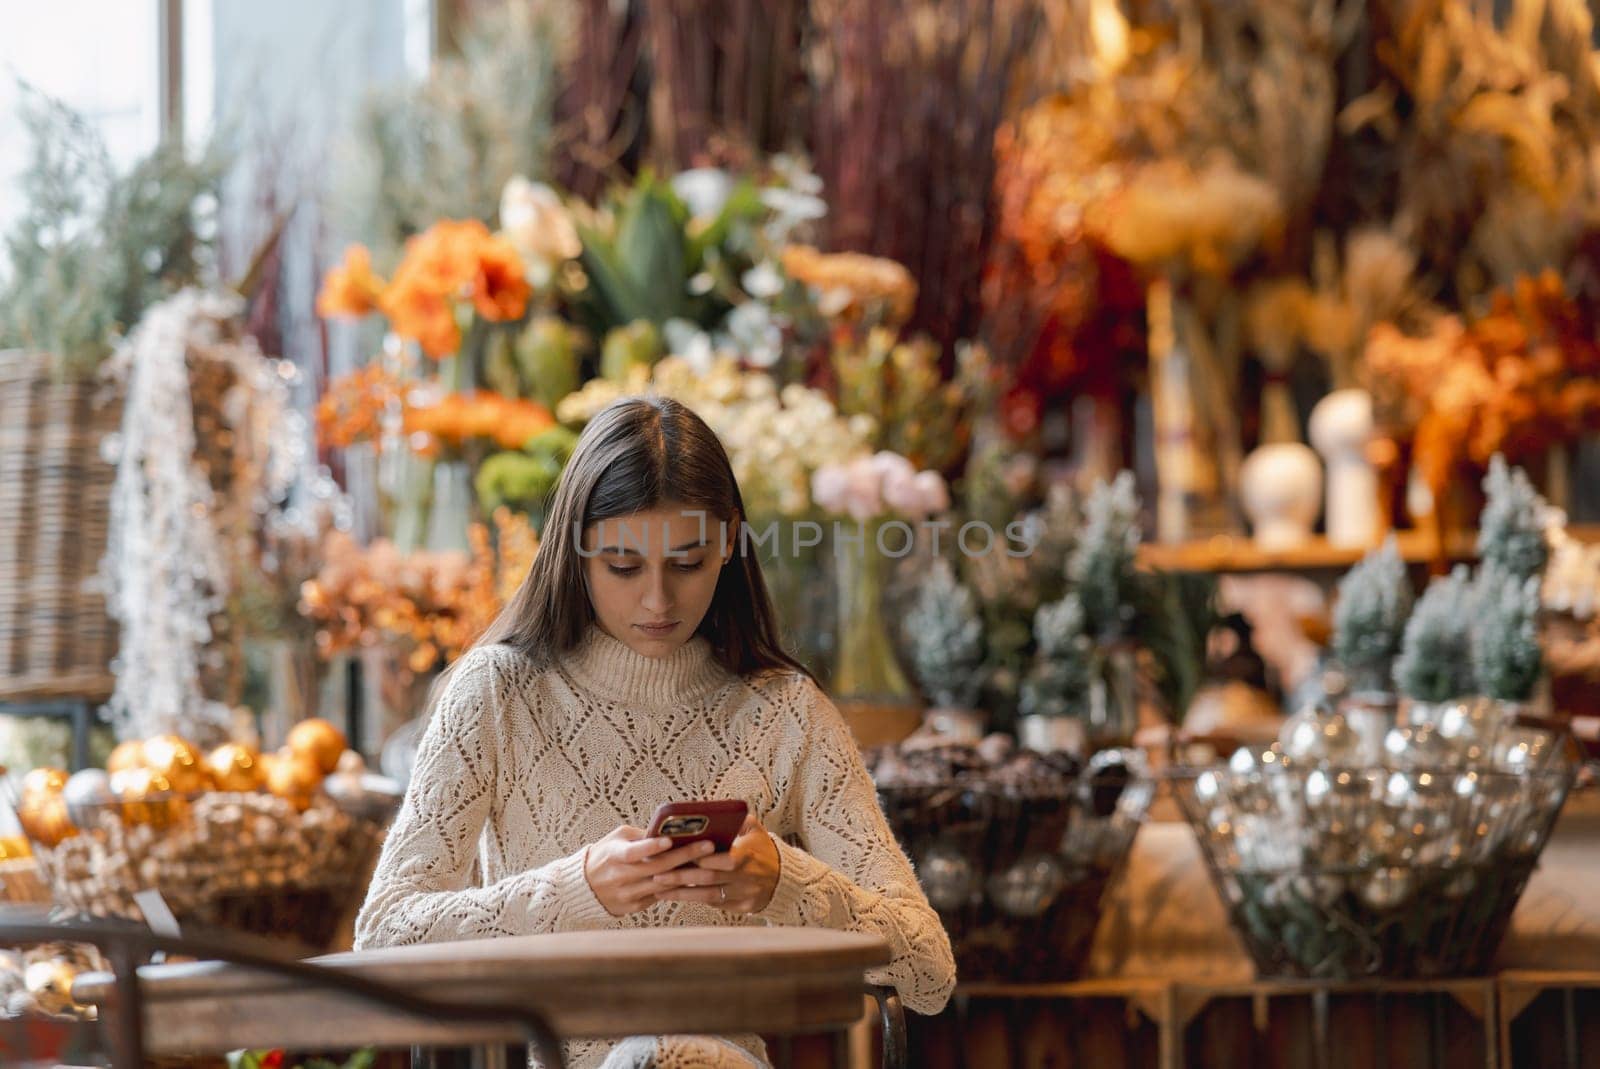 A dazzling, vibrant young woman shopping for New Year's decor and checking her smartphone. High quality photo